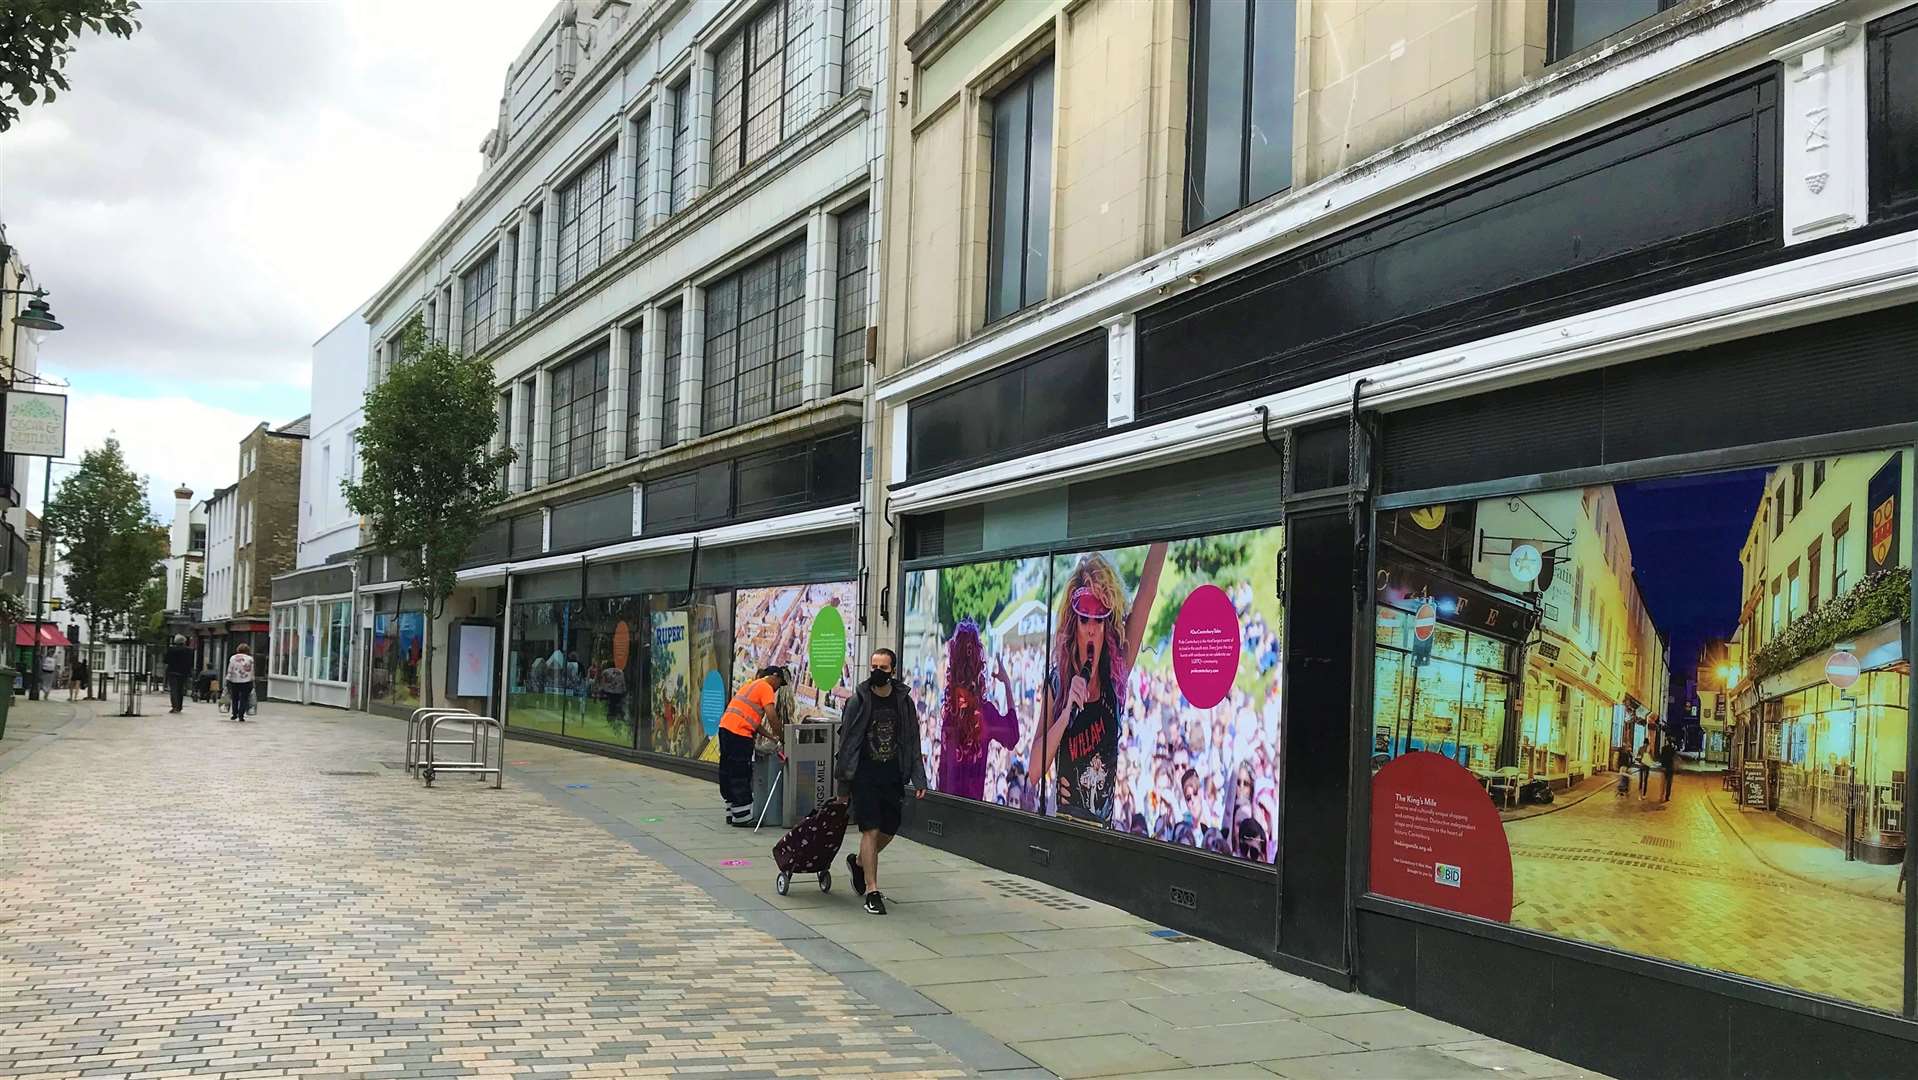 The display was intended to brighten up the windows of the former Debenhams in Canterbury city centre